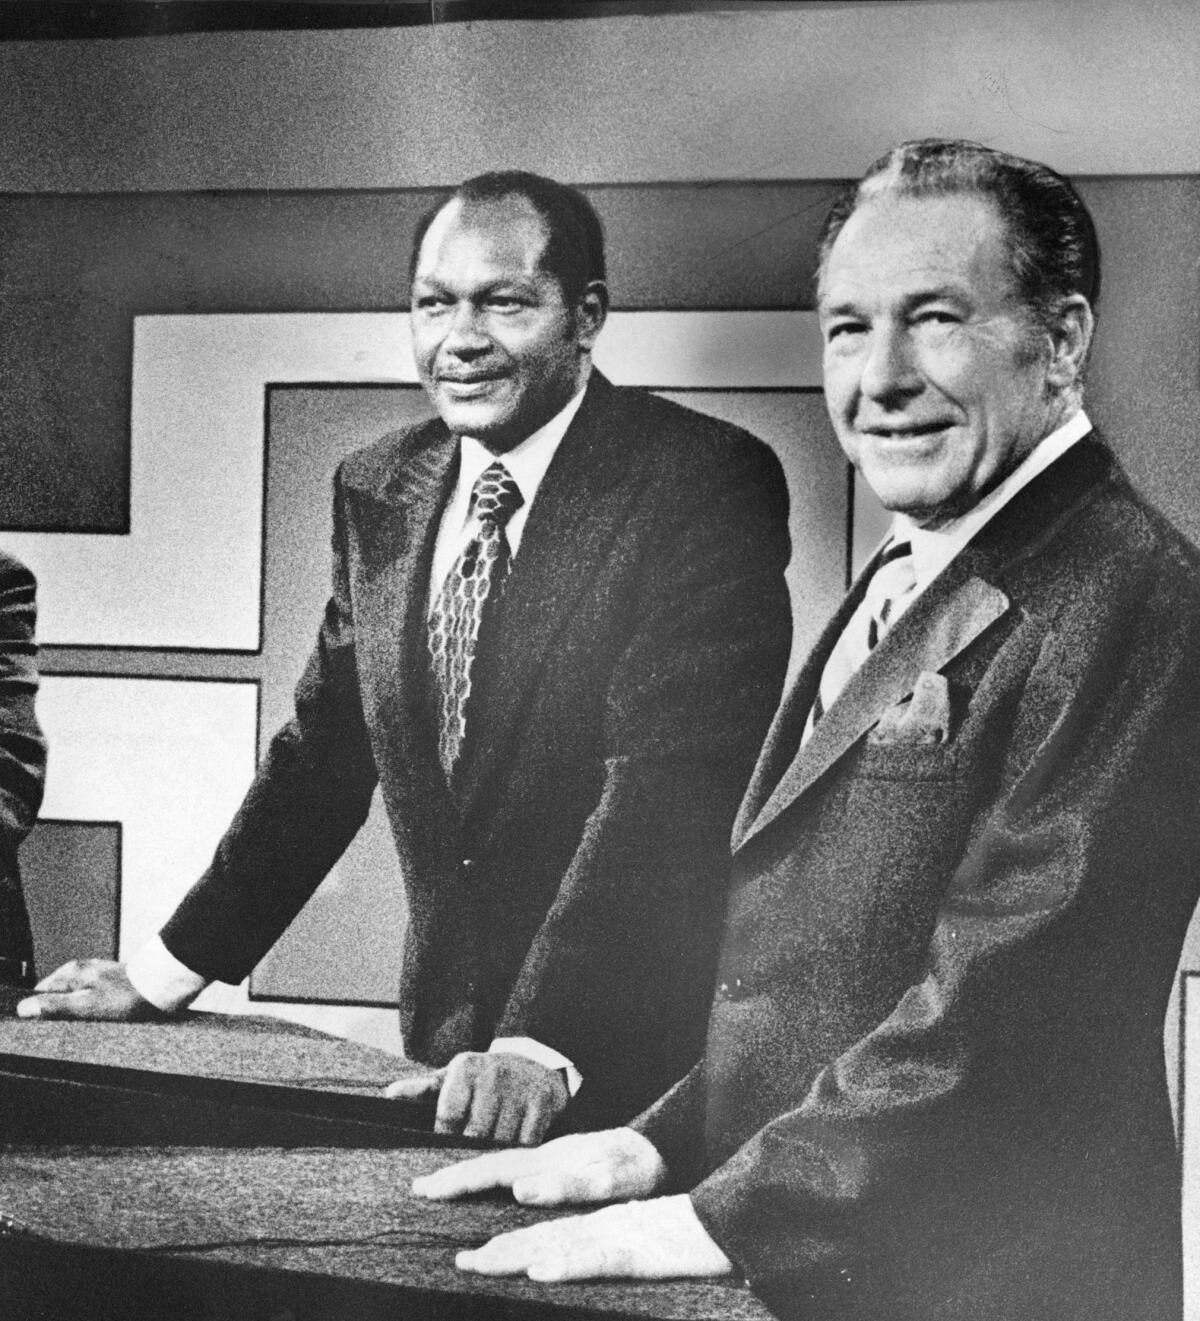 City Councilman Tom Bradley and Mayor Sam Yorty in TV studio before the start of a debate during their 1973 mayoral campaign.